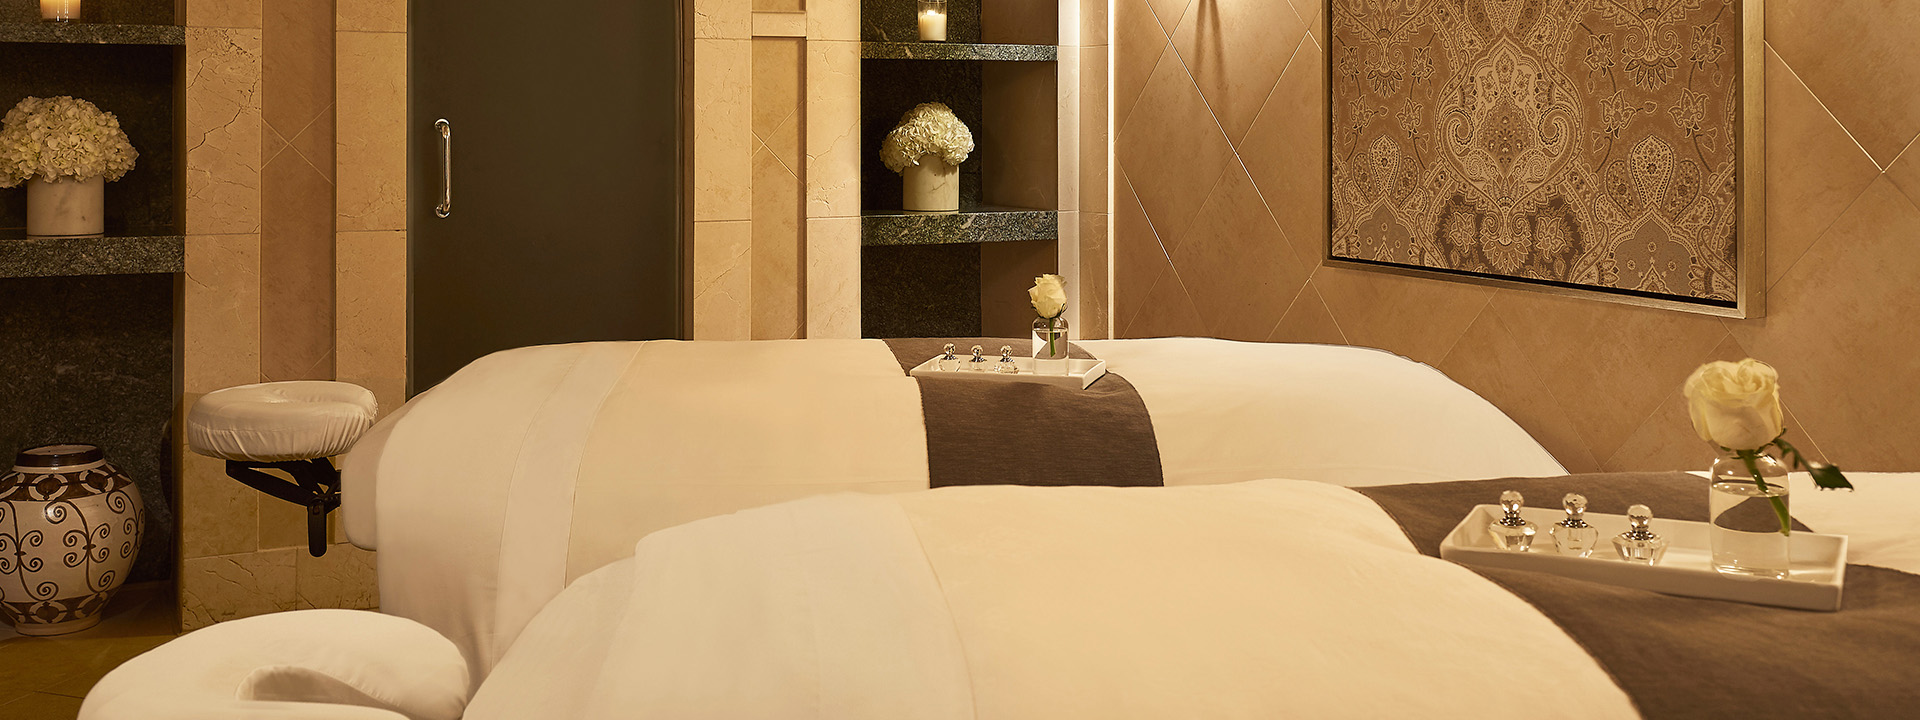 The quiet cocoon of a spa treatment room